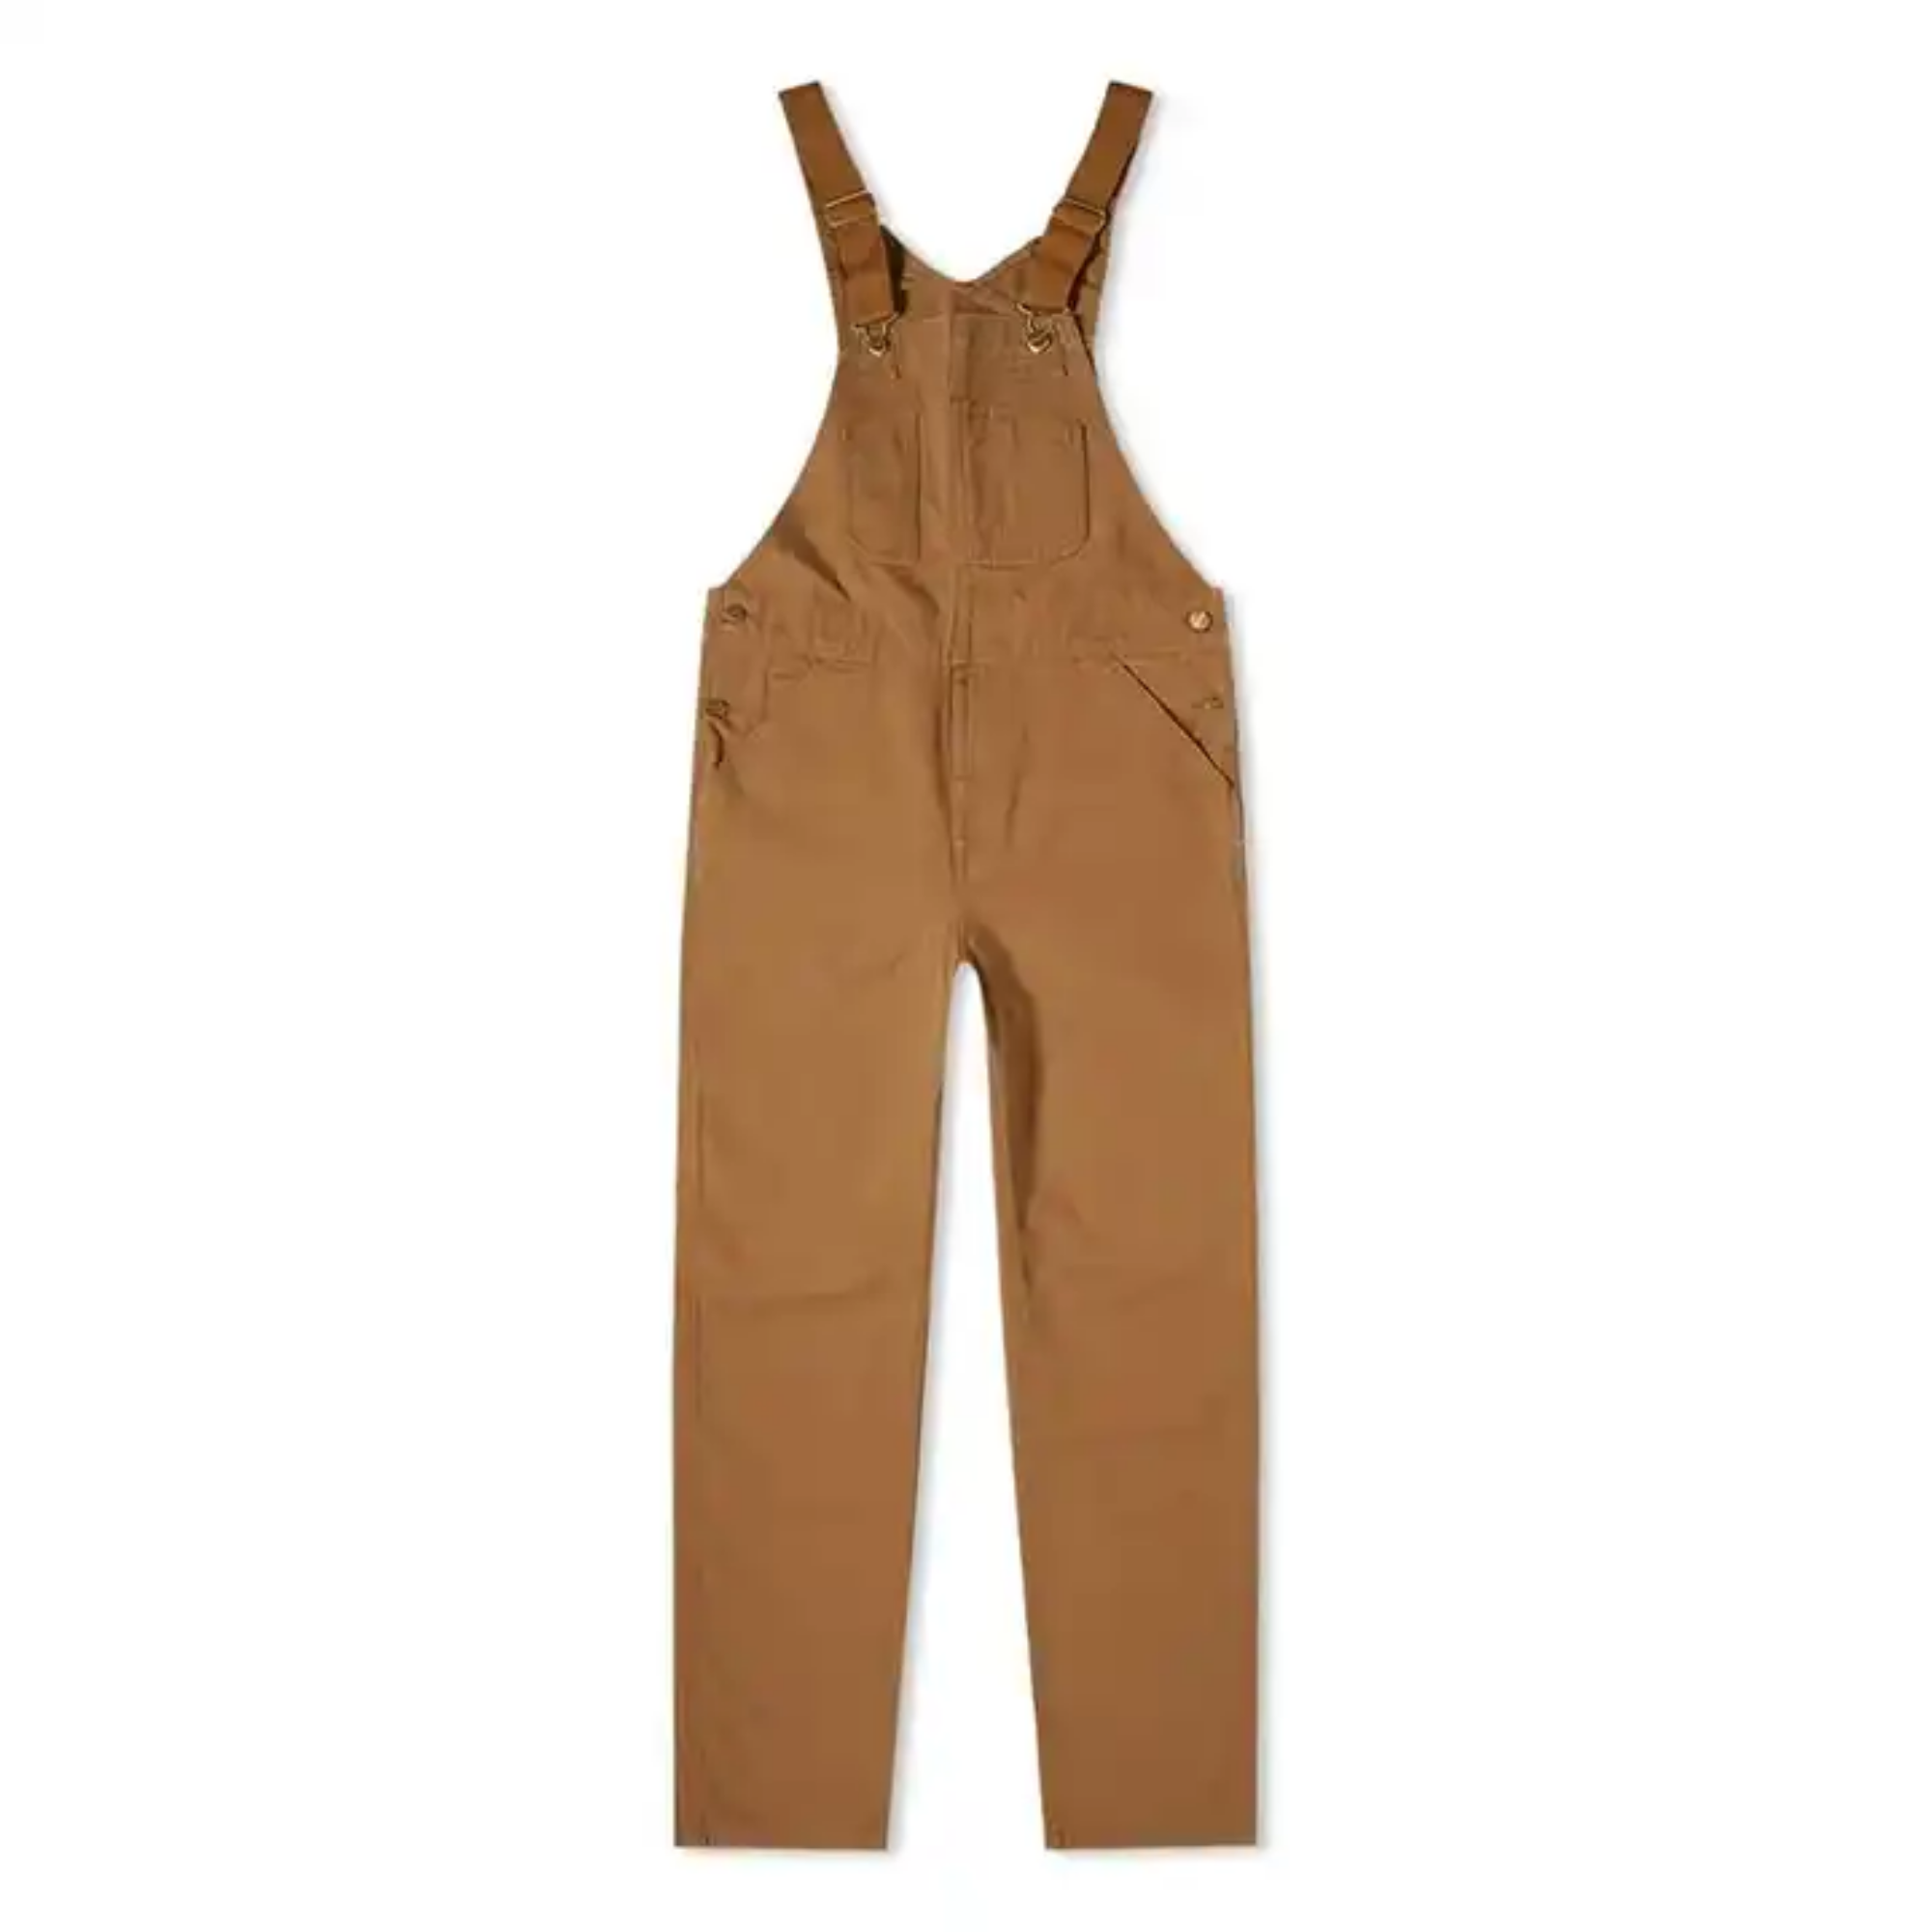 Outdoor Waterproof Dry Custom Cotton  Trousers Multi-function Wholesale Bib Overalls With Two Pockets